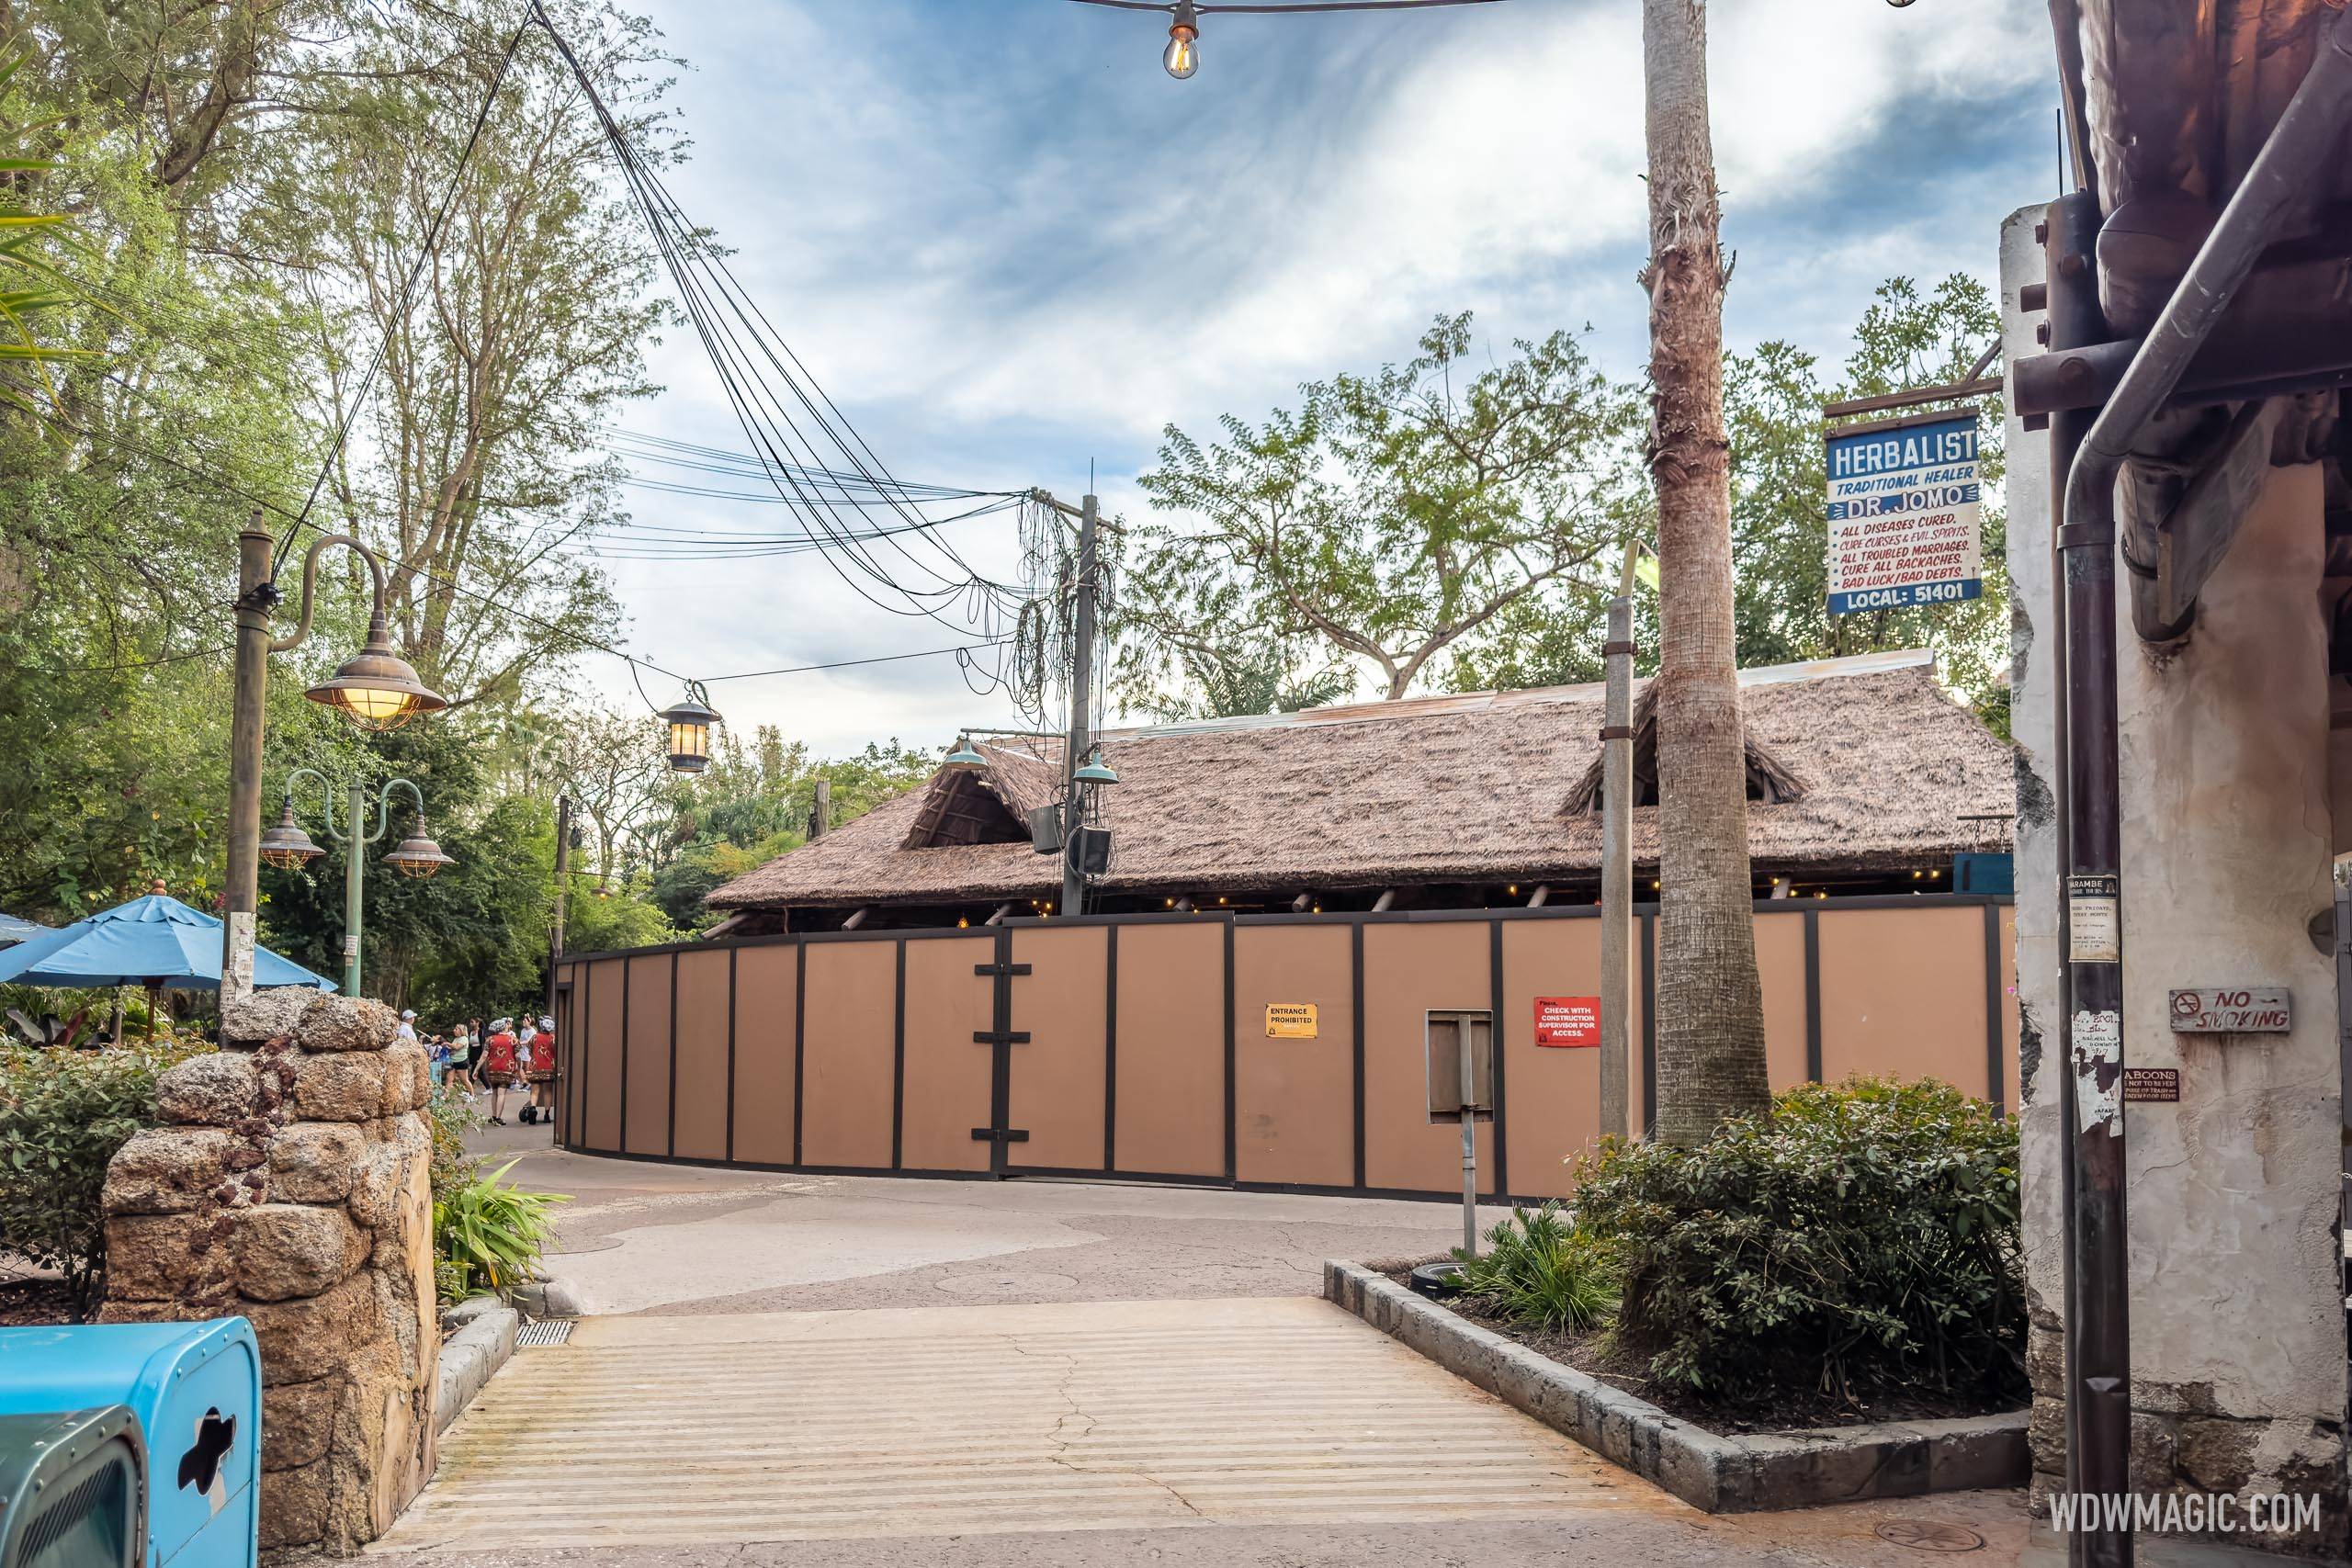 Disney's Animal Kingdom to soon open expanded covered seating at Harambe Market